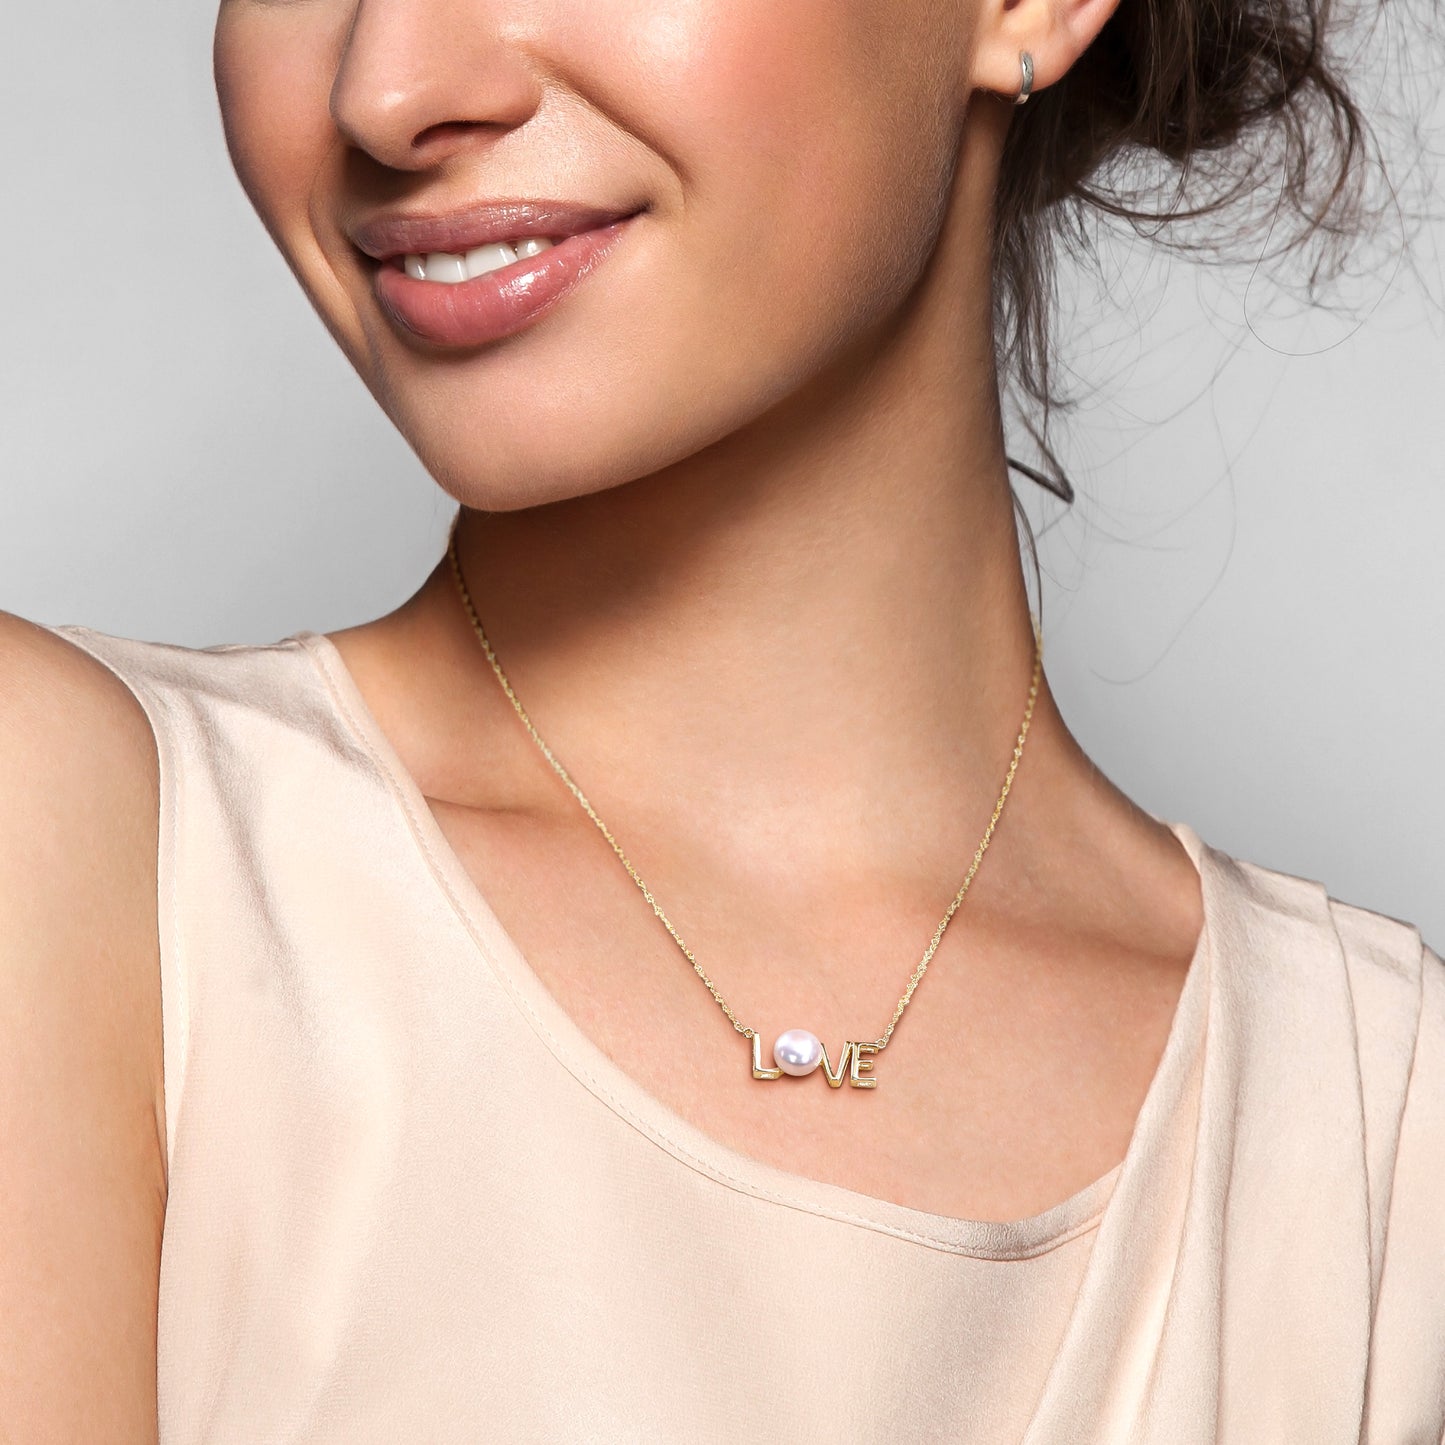 Pearl "LOVE" Necklace in 10k Yellow Gold